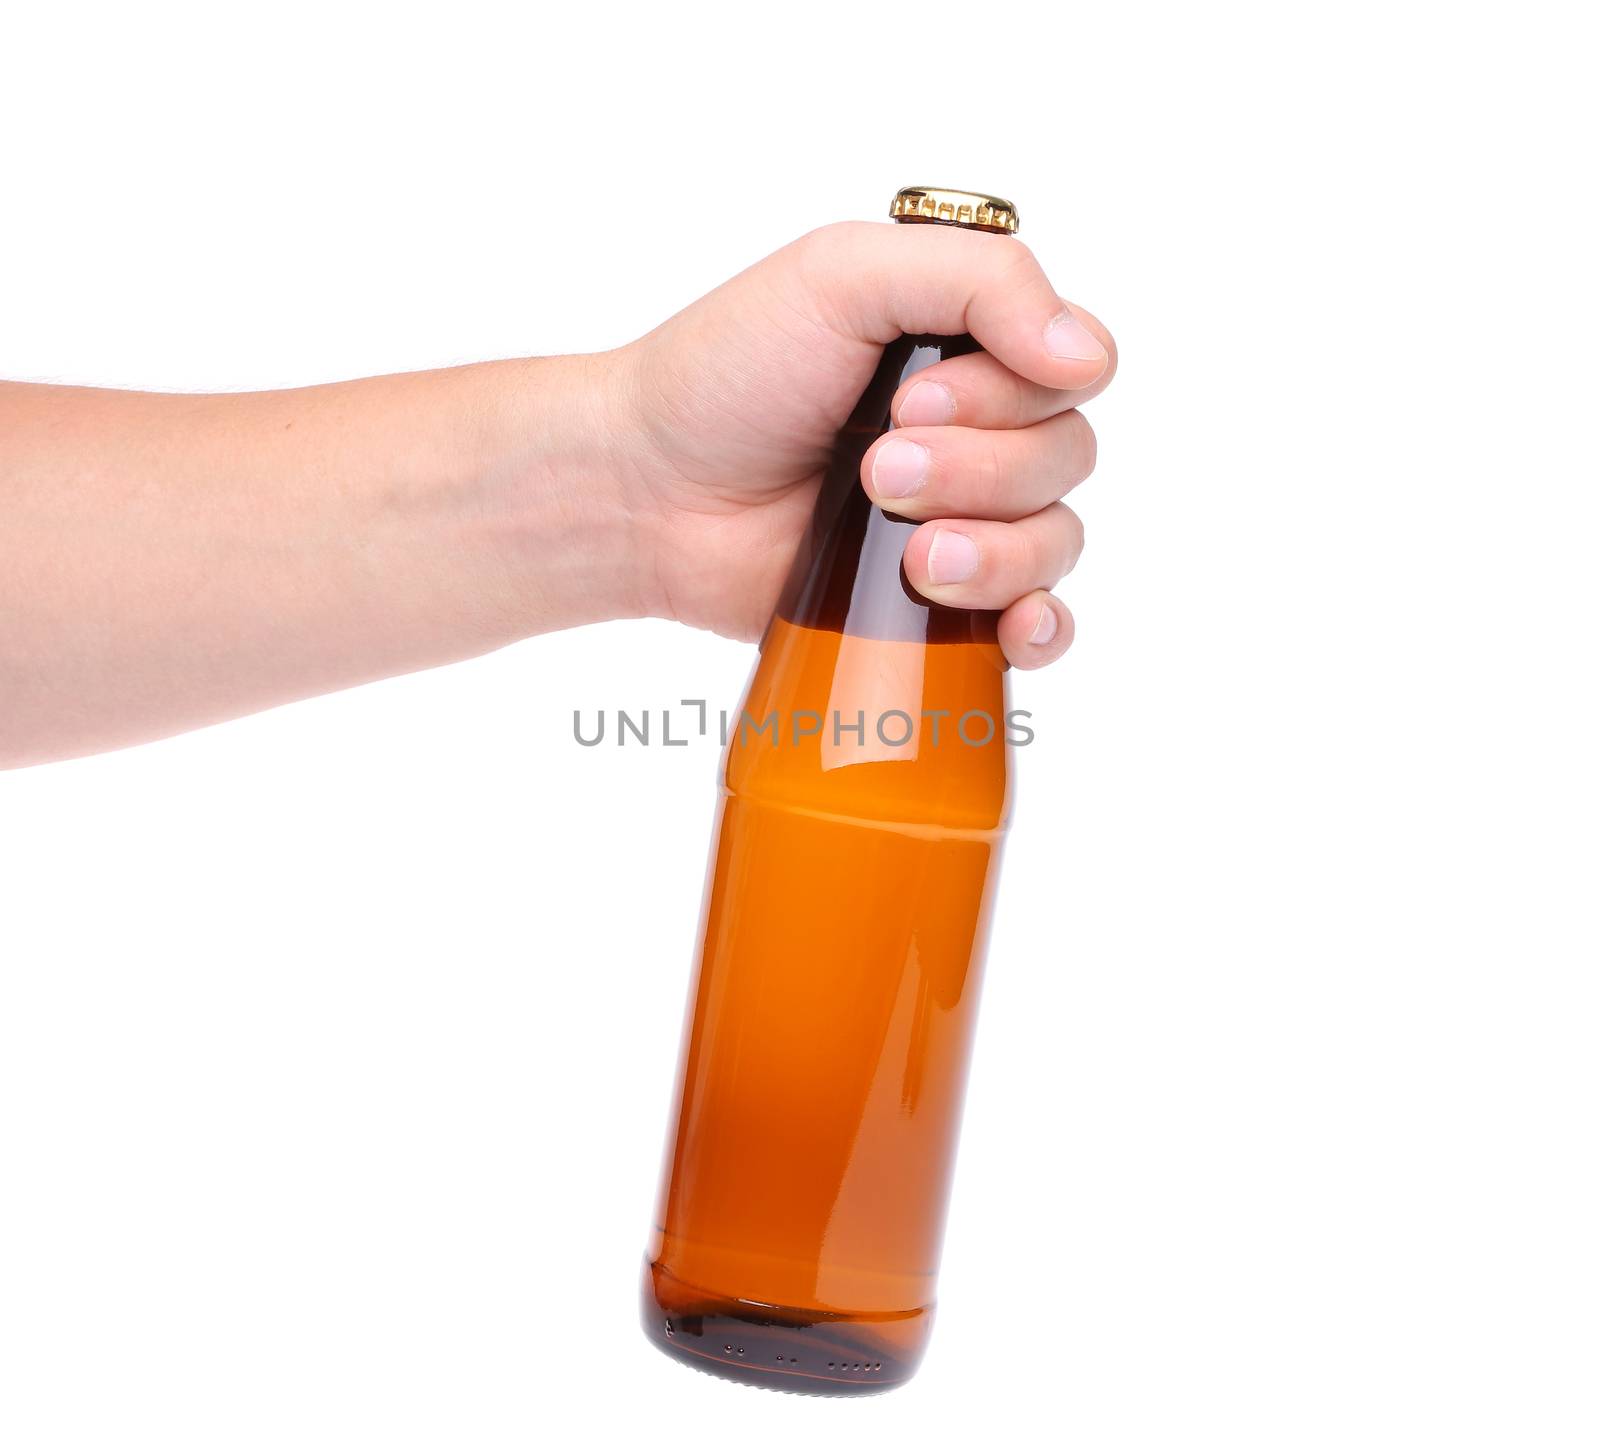 One beer bottle in a hand on the white background